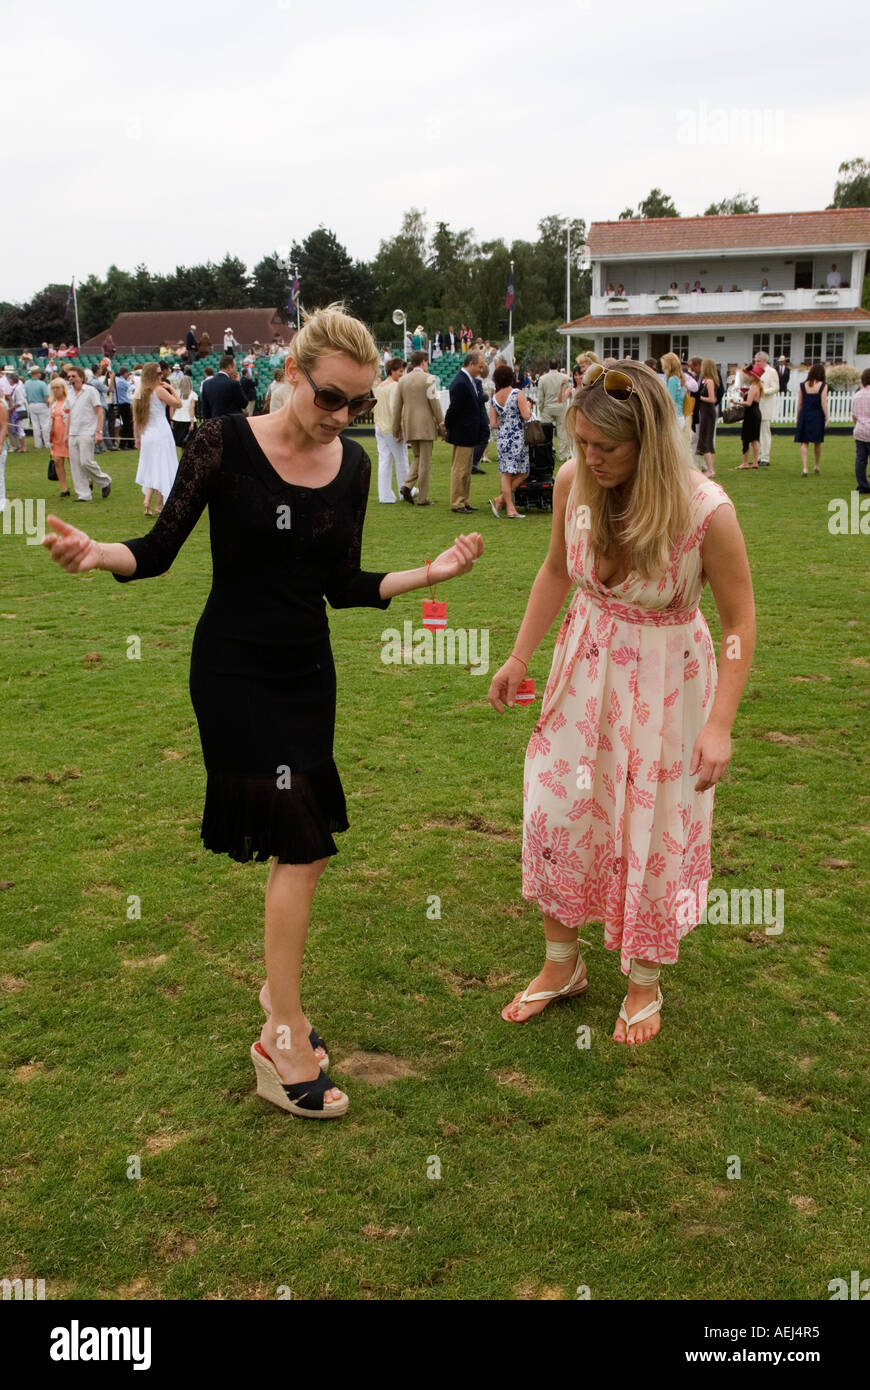 Treading in divots Guards Polo Club Windsor Great Park. Cartier International Polo match Egham, Surrey England  2000s 2006 HOMER SYKES Stock Photo